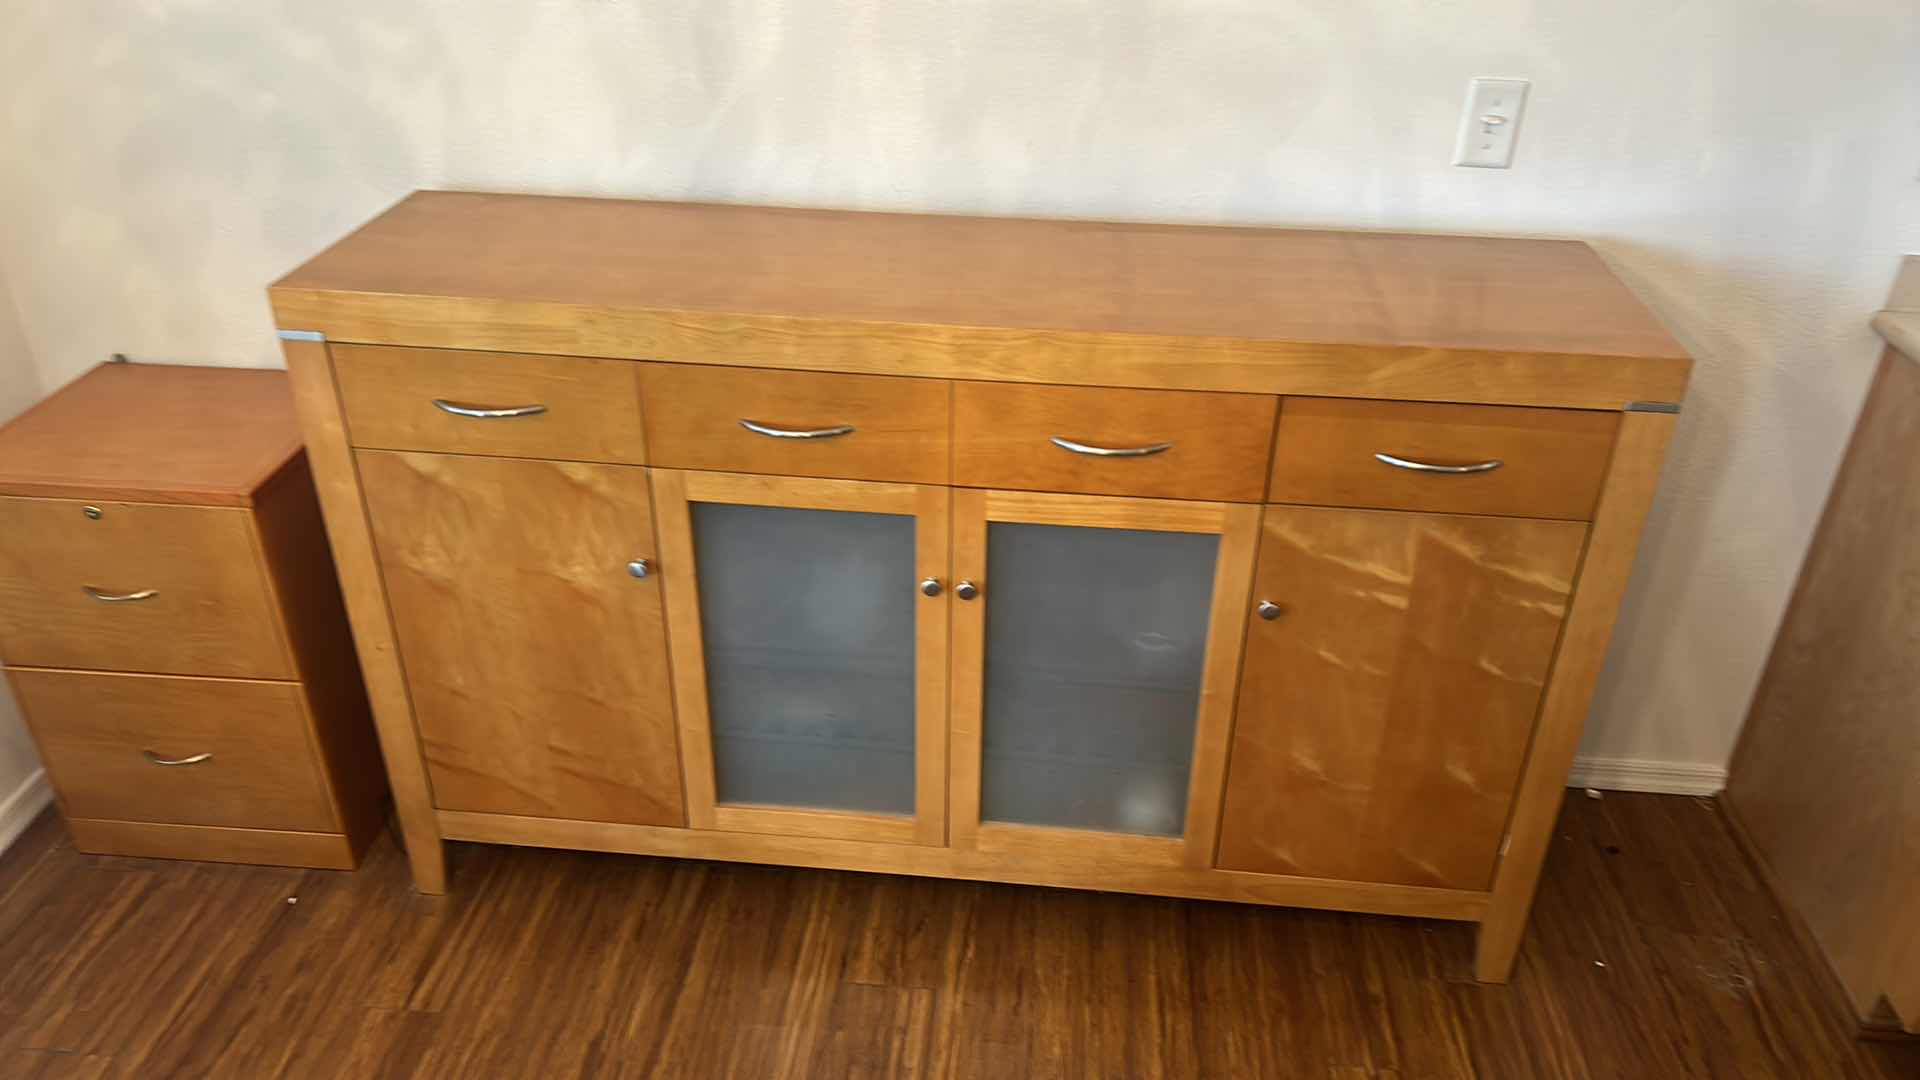 Photo 2 of BEAUTIFUL MID CENTURY BURL SATINWOOD SIDEBOARD WITH CHROME ACCENTS AND FROSTED GLASS (CONTENTS NOT INCLUDED) 67“ x 17“ x 40“